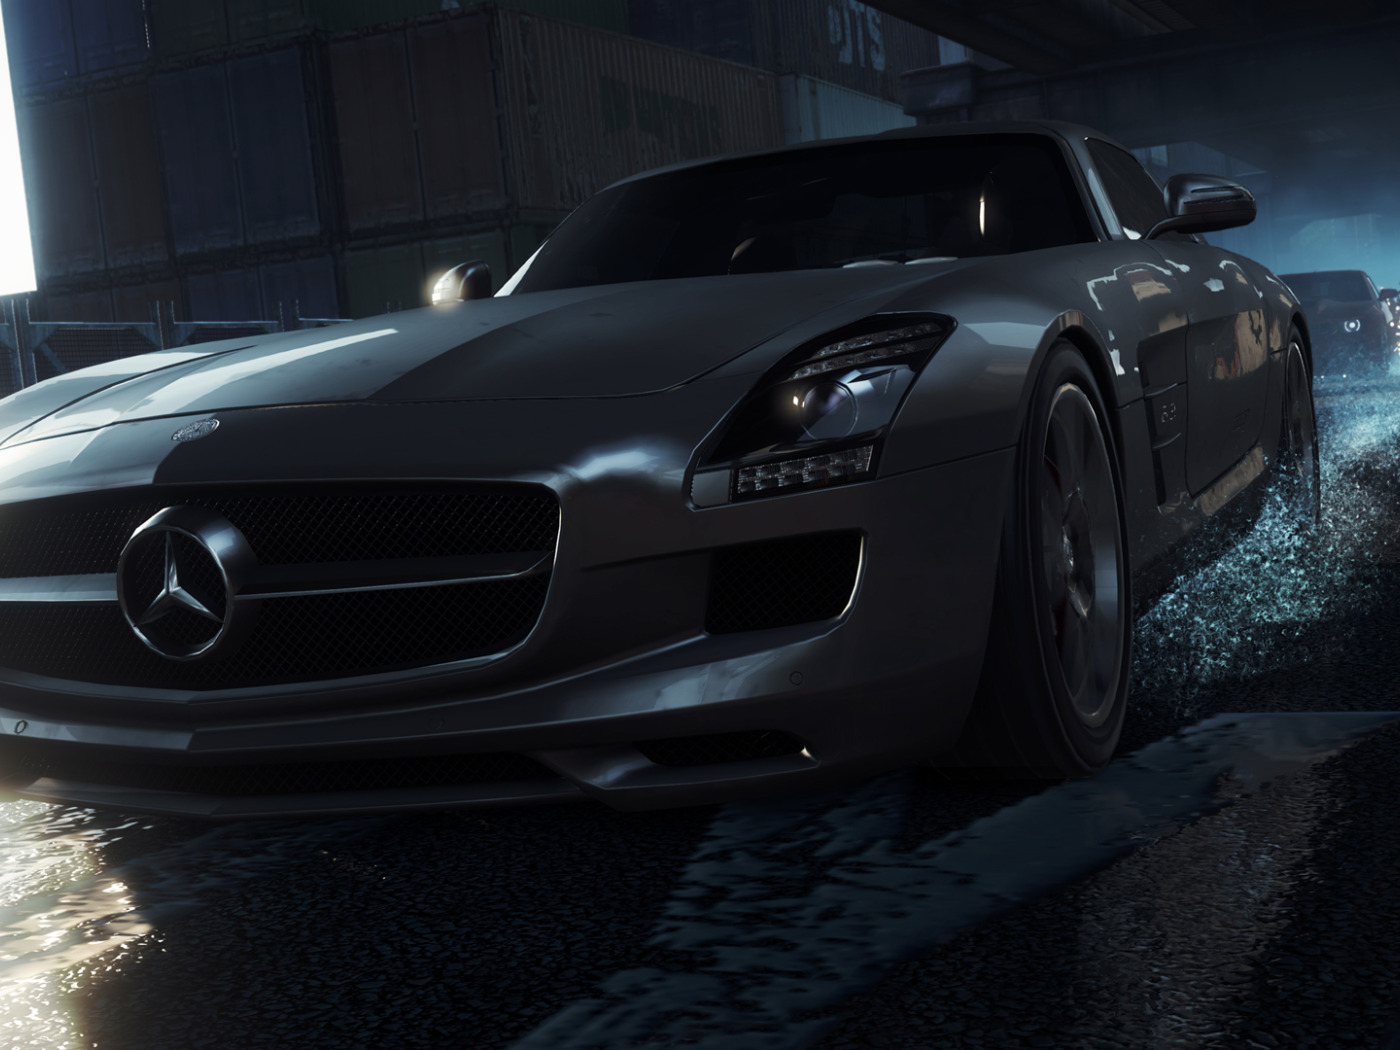 Игры гонки недфорспид. Need for Speed most wanted 2012. Mercedes Benz NFS most wanted 2012. Нфс most wanted 2012. Mercedes SL 65 most wanted 2012.